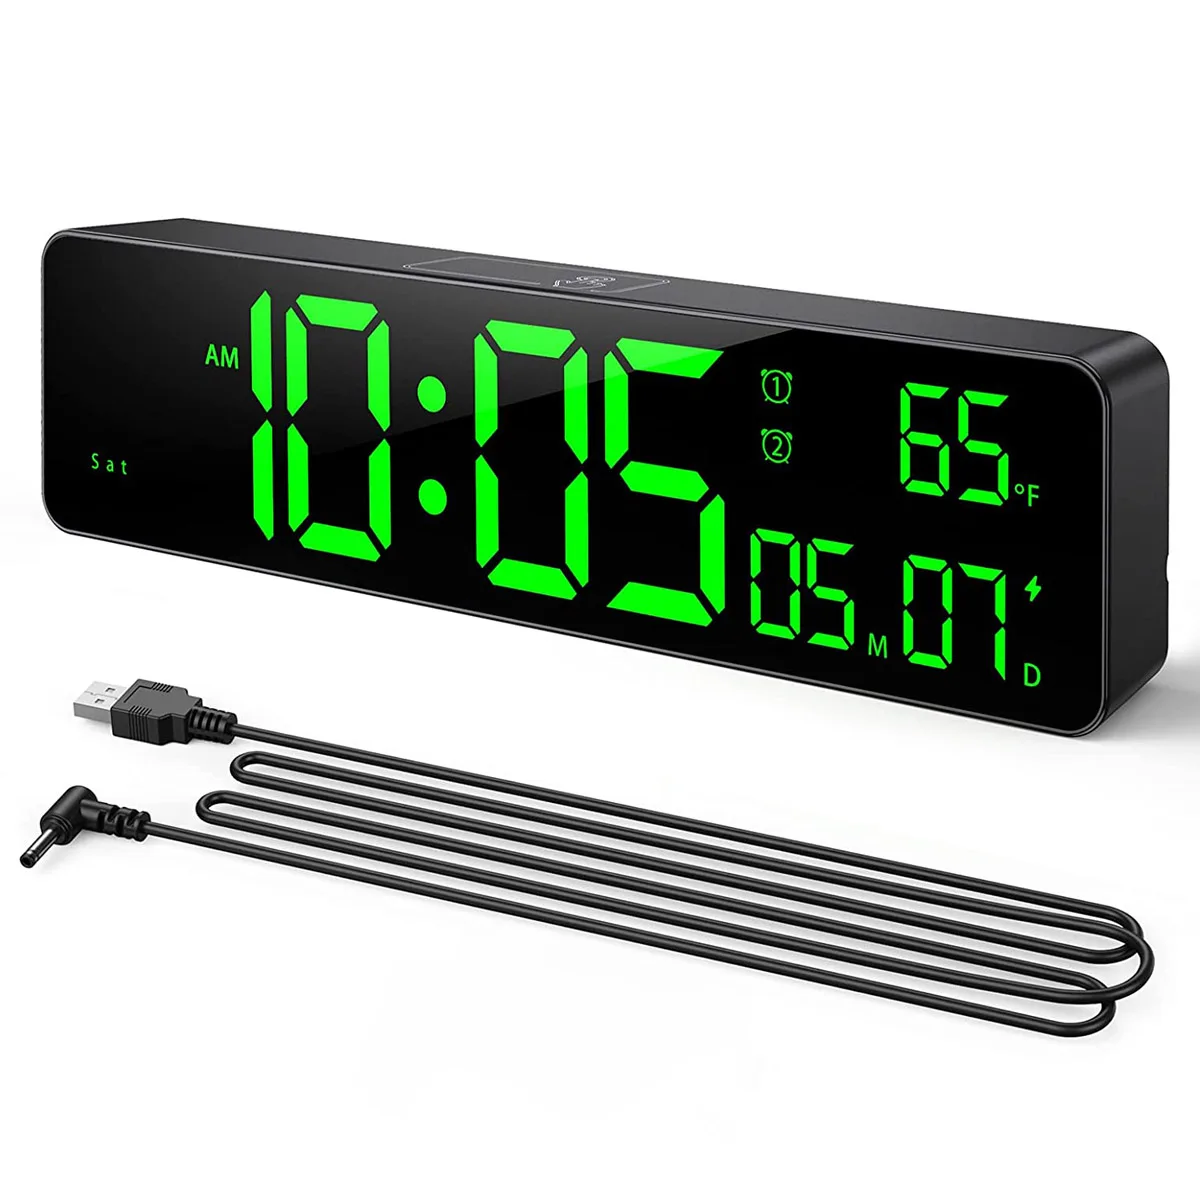 

Digital Clock with Time, Date, Indoor Temperature, 2 Alarm Clocks, 12/24H, Snooze, 10; Large Display Clock for Wall Mount Desk